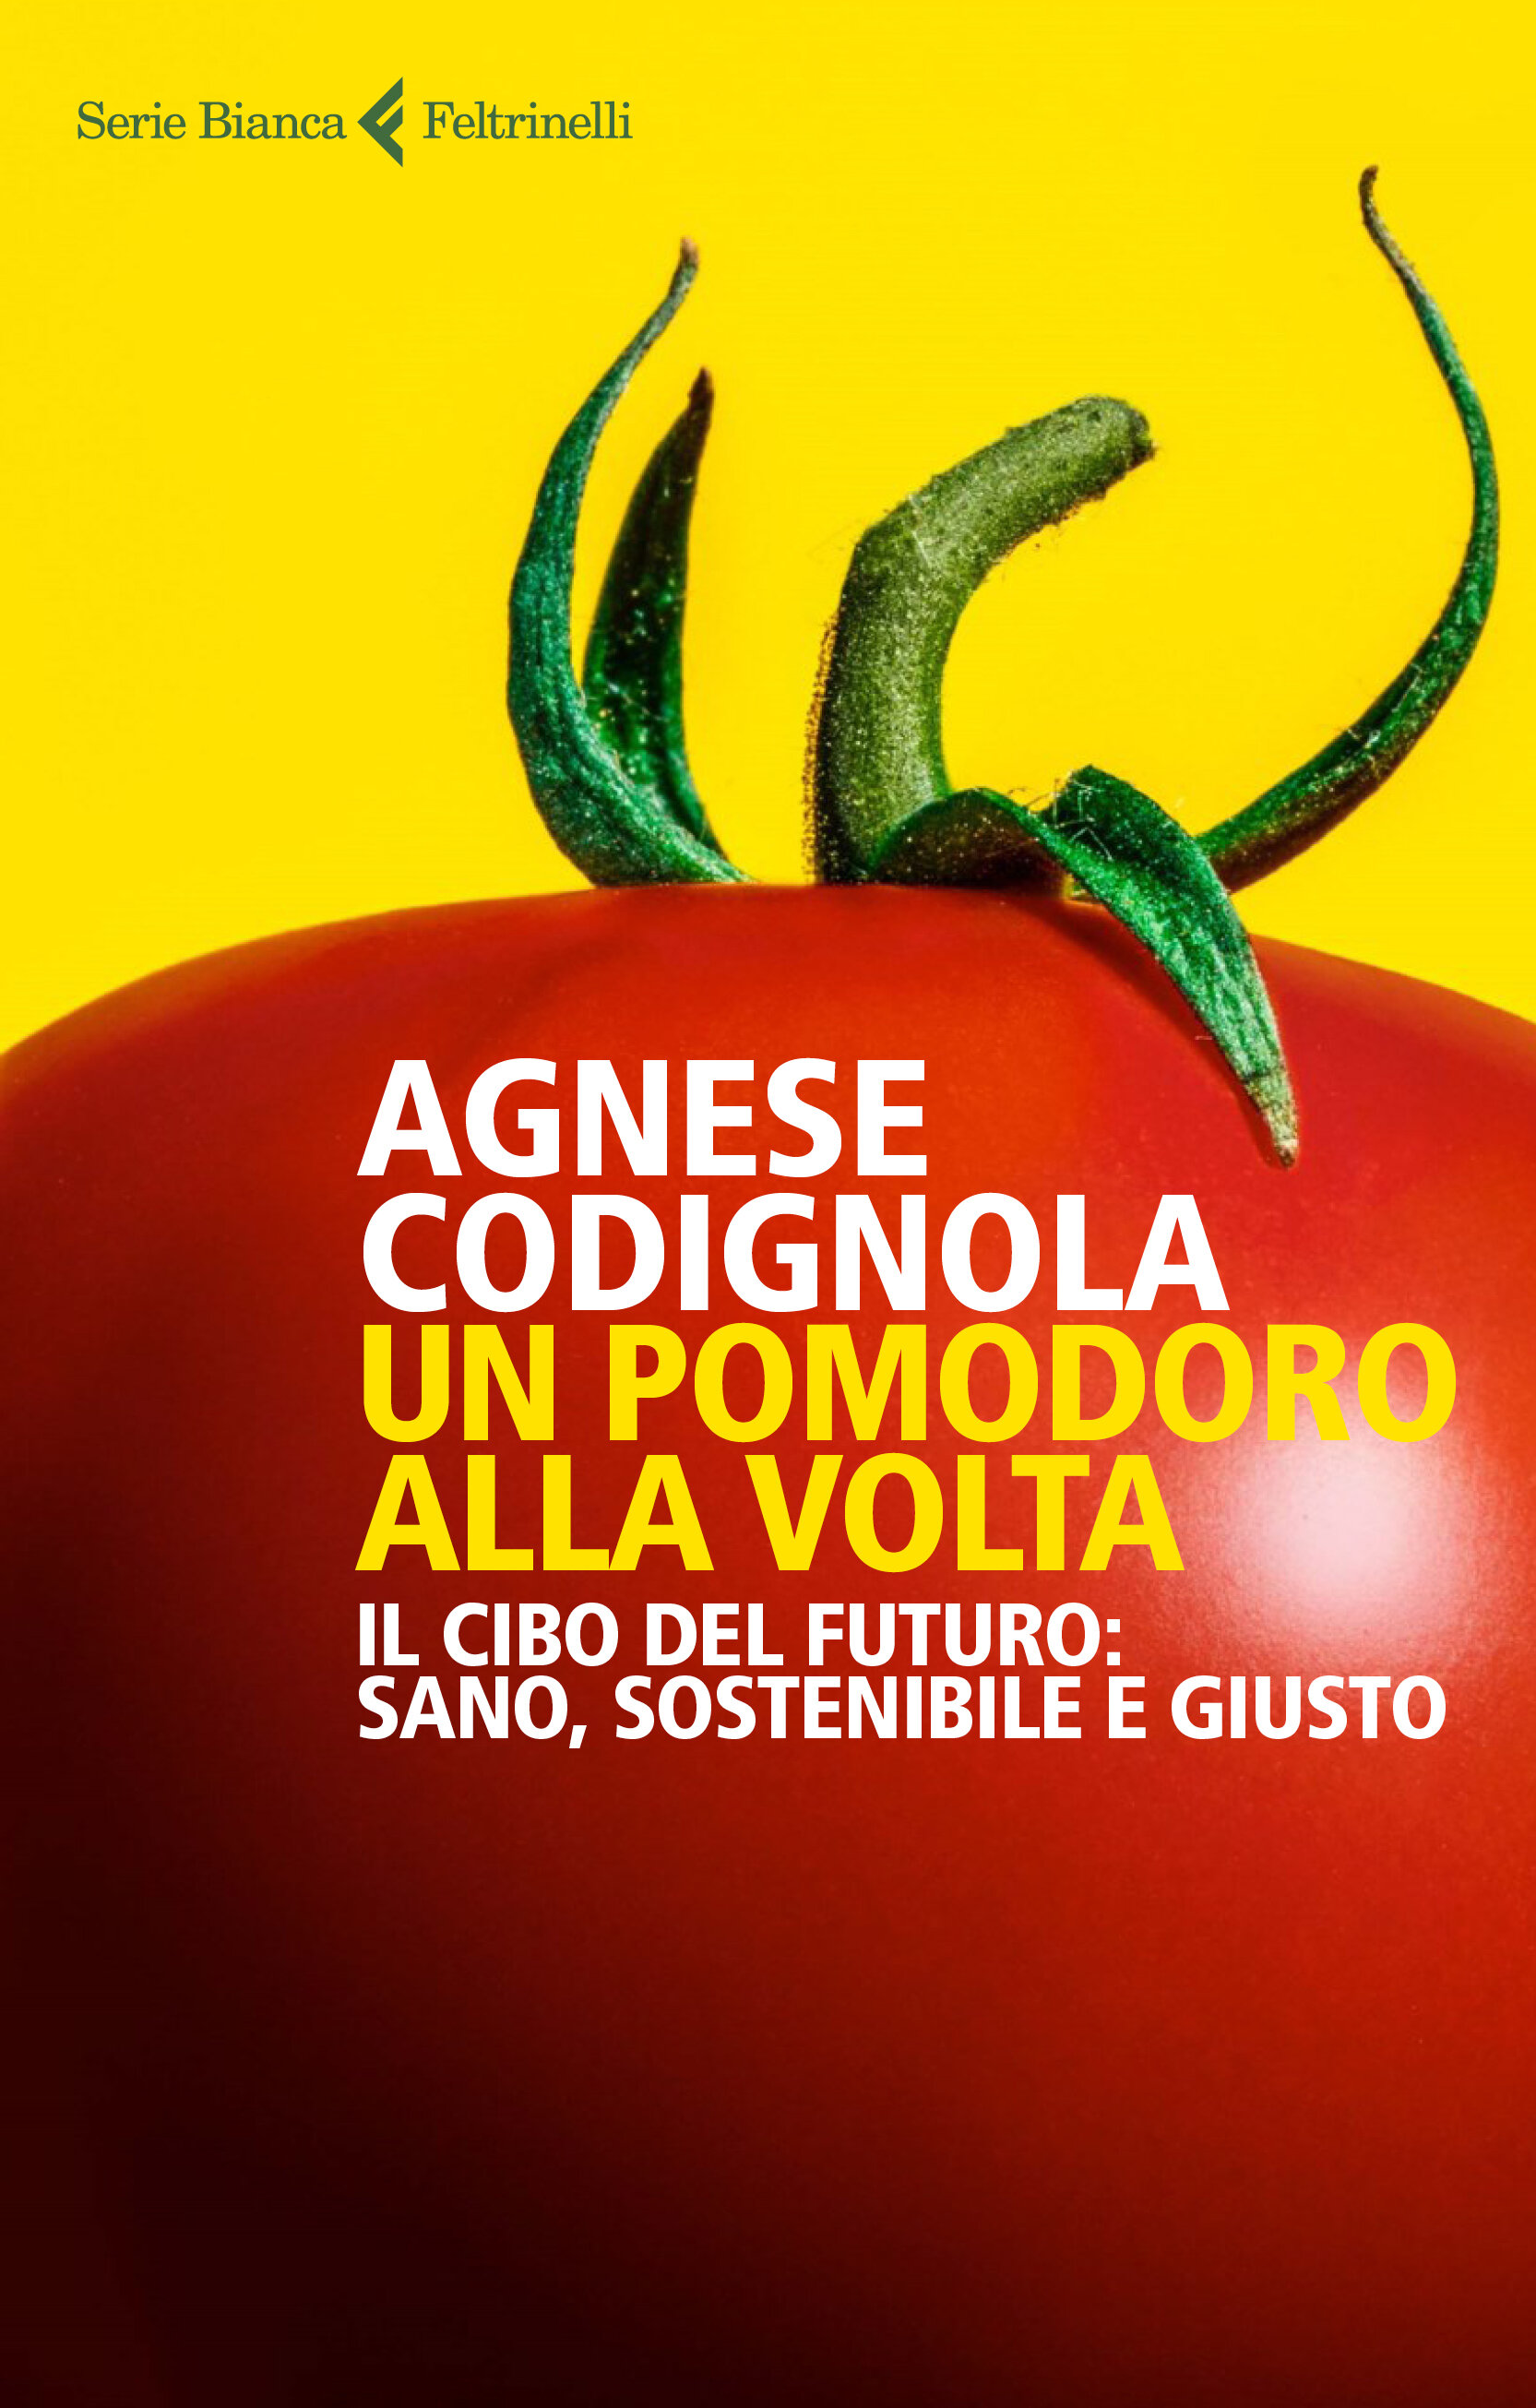 Cover book for Feltrinelli